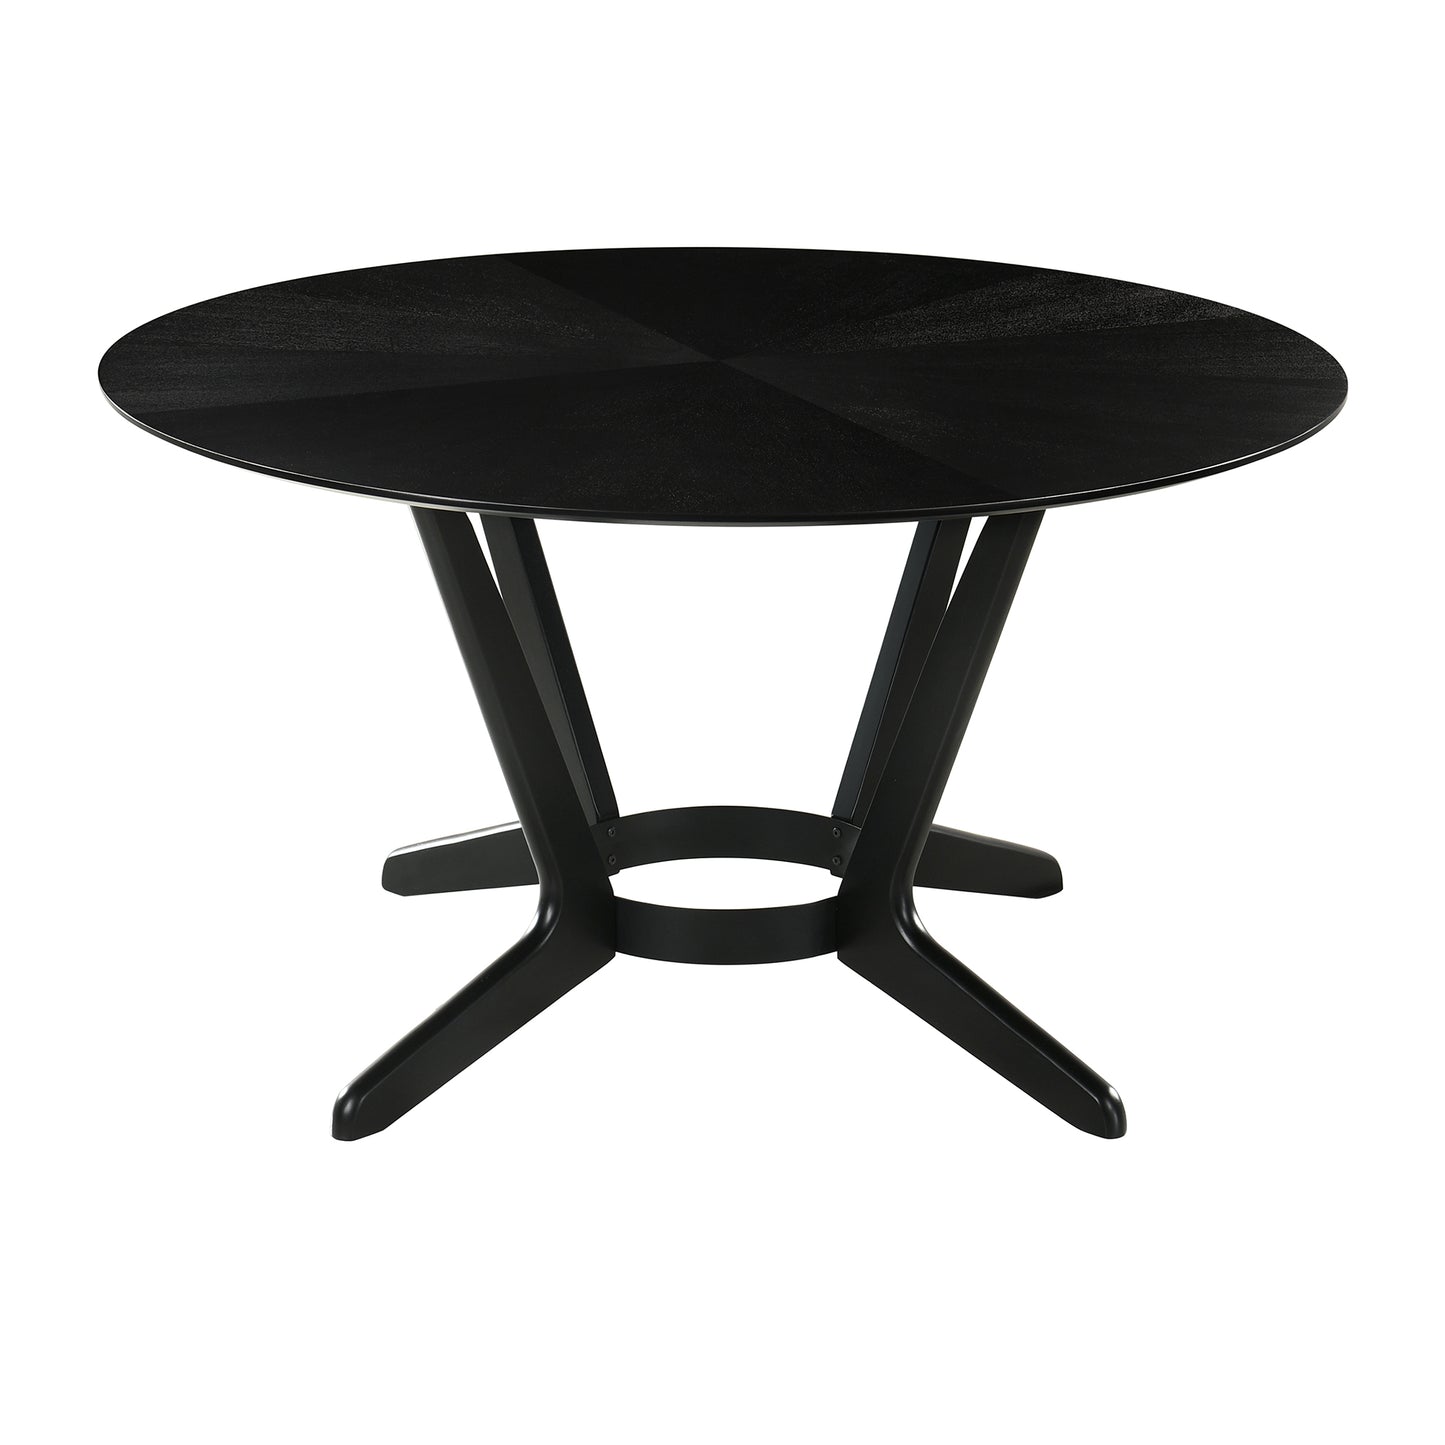 Santana 5 Piece Round Black Wood Dining Table Set with Charcoal Fabric